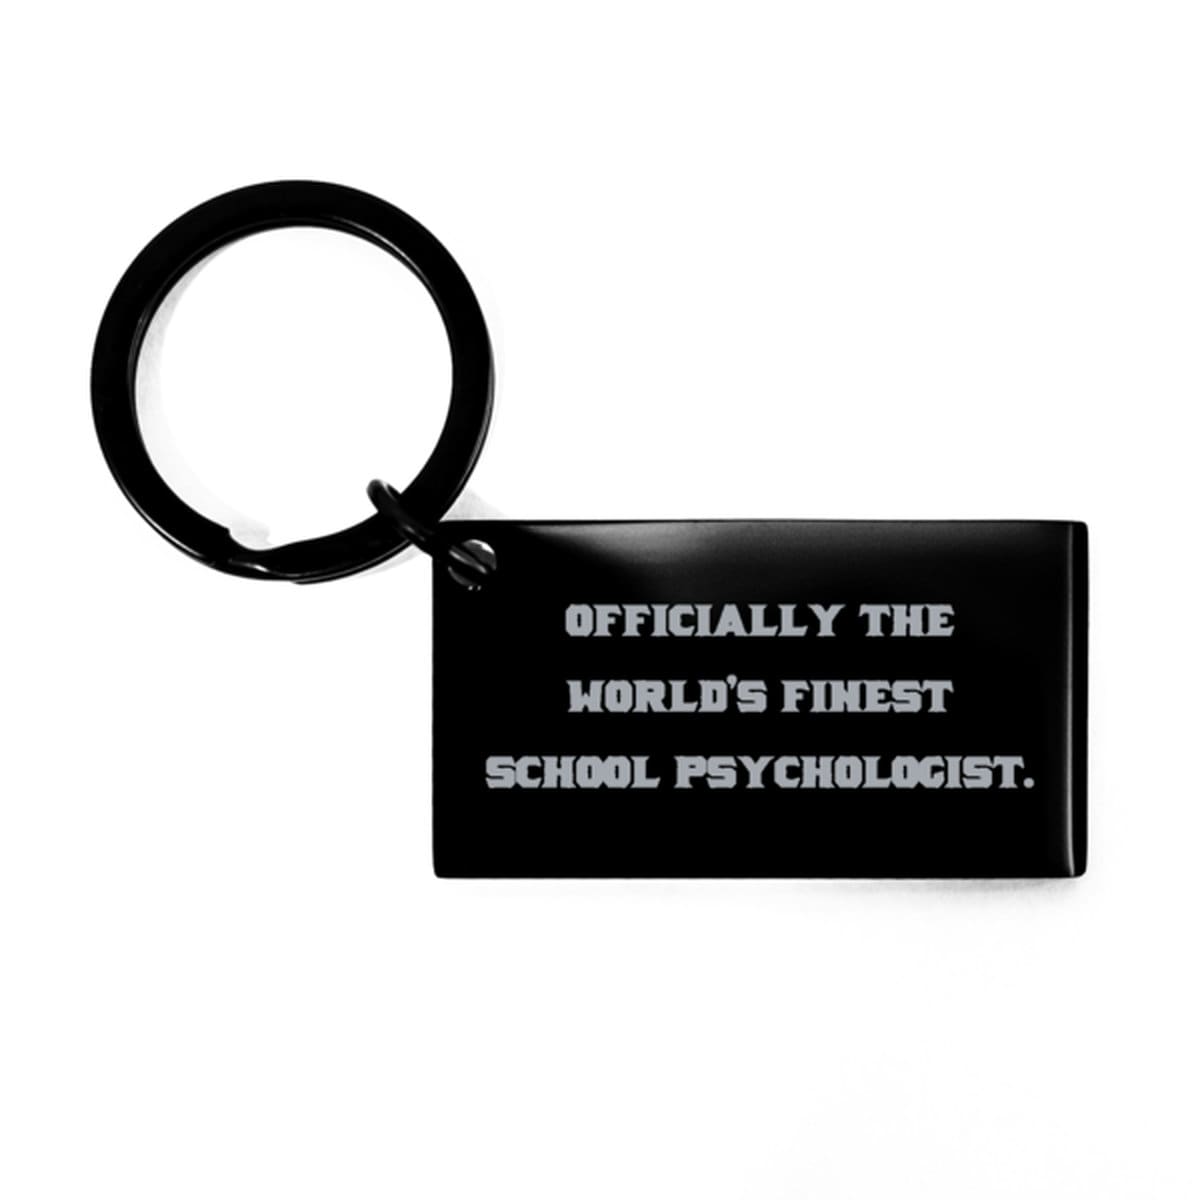 Funny School Psychologist Keychain, Officially The World's Finest School, School Psychologist Appreciation Gift, Gifts From Co Workers etsy.me/45kayjB #colleagueskeychain #giftsfromfriends #graduationgifts #professionsgifts #funnykeychain #funnyblackkeyring #gi